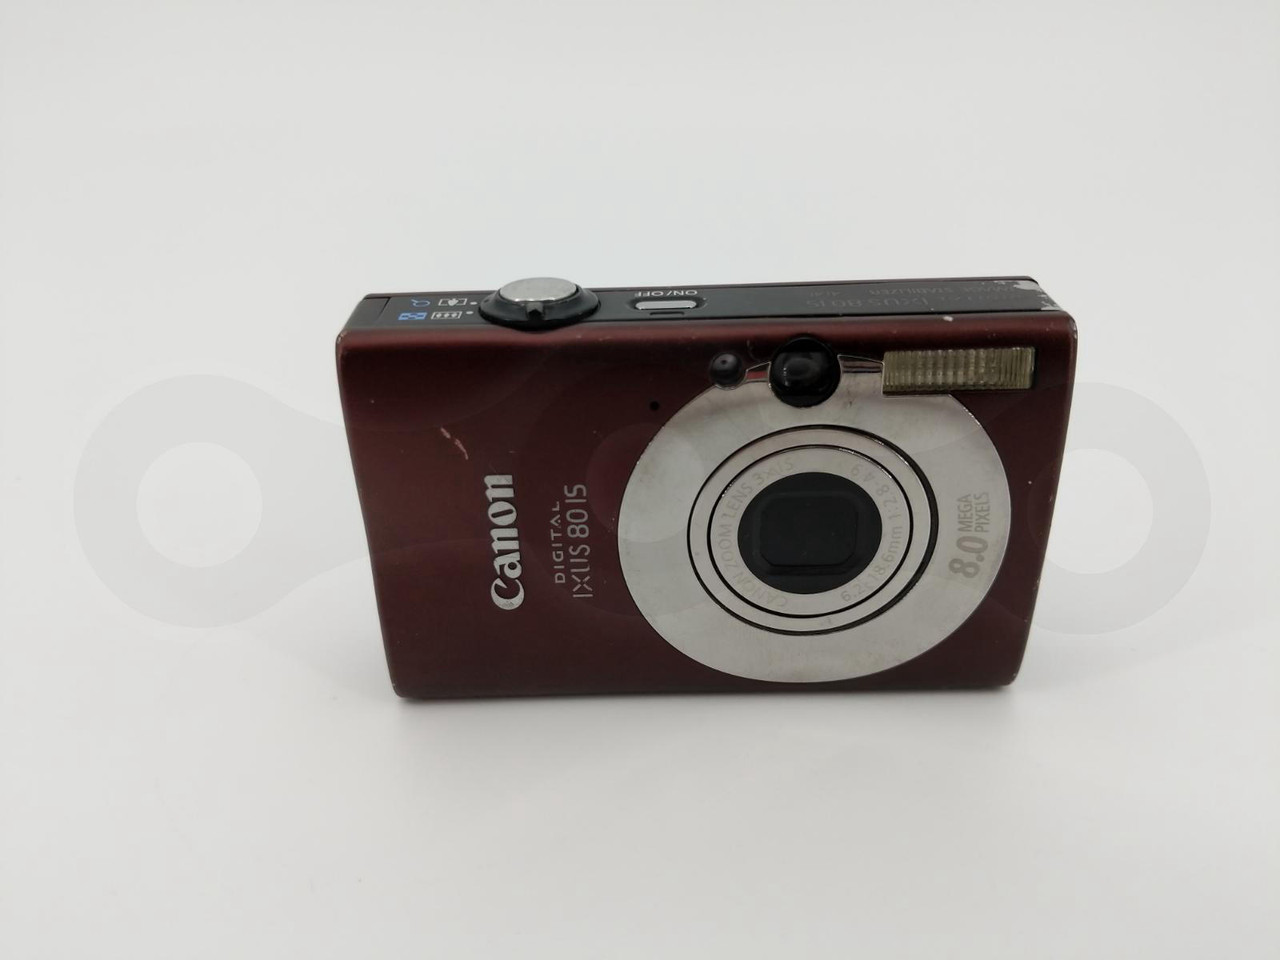 CANON DIGITAL SD1100 IS / IXUS 80 IS 8.0MP BROWN CAMERA ONLY PC1271